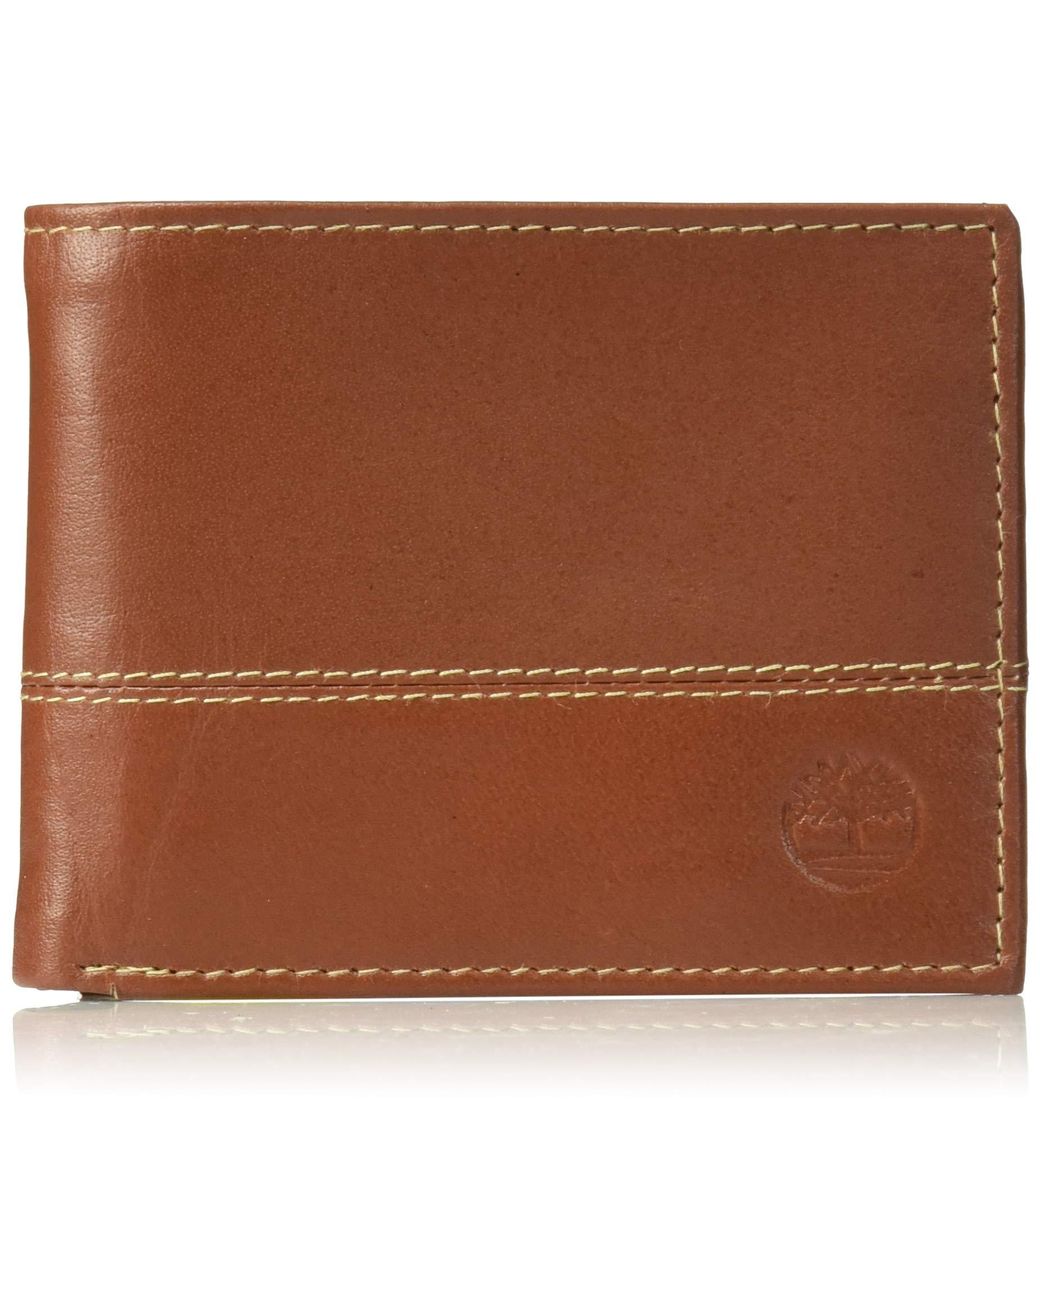 Timberland Hunter Leather Passcase Wallet Trifold Wallet Hybrid in ...